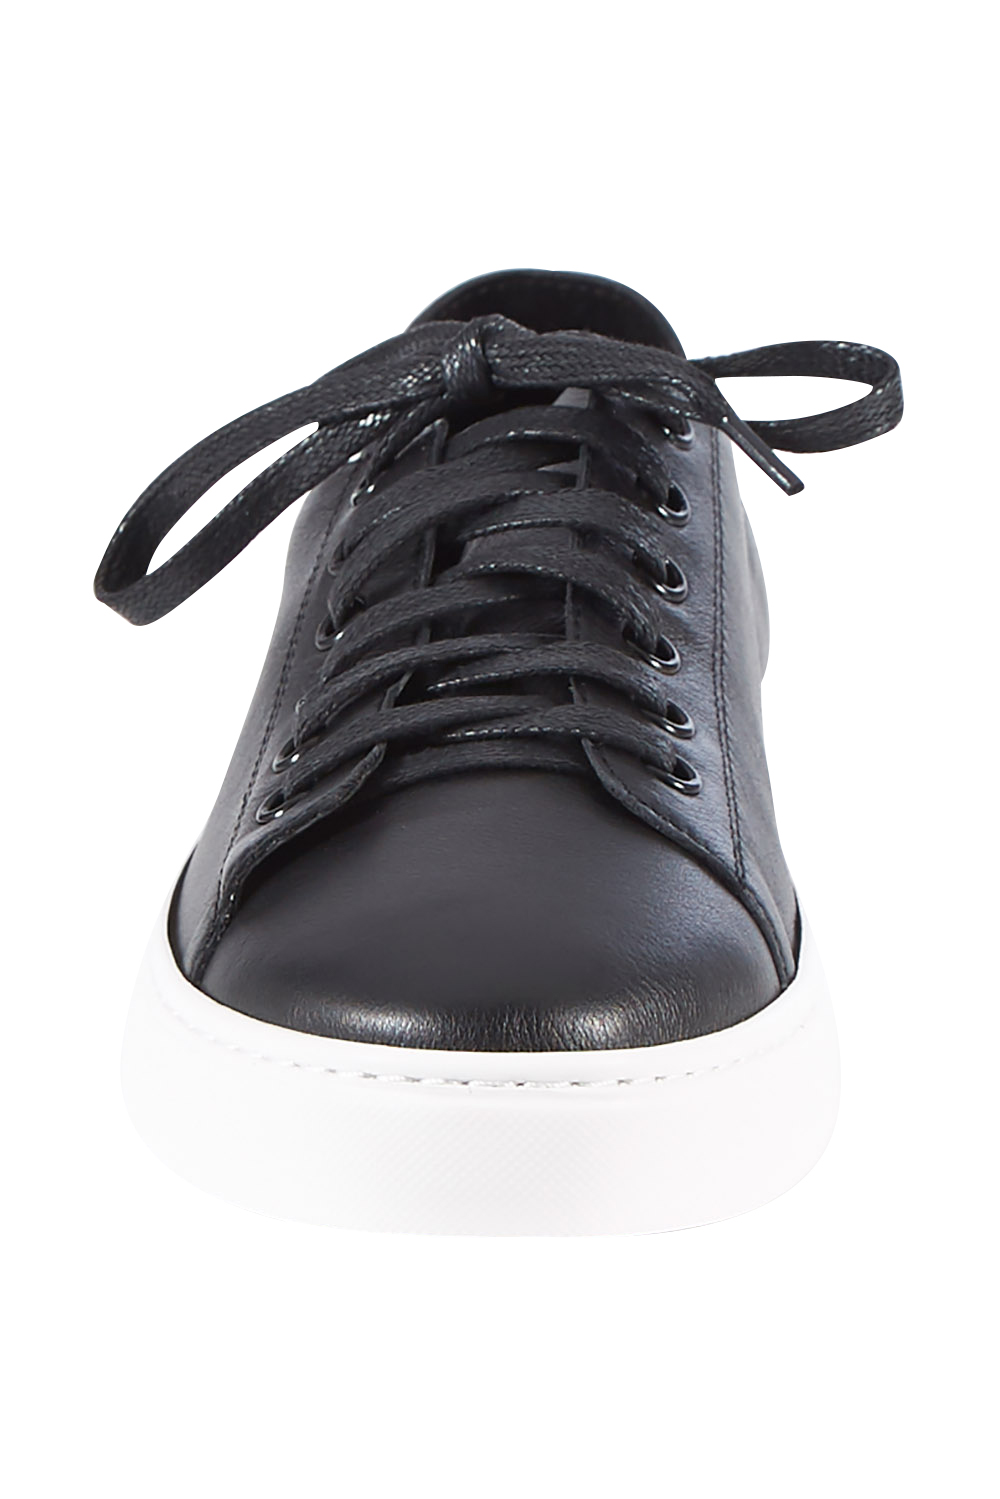 black leather runners womens